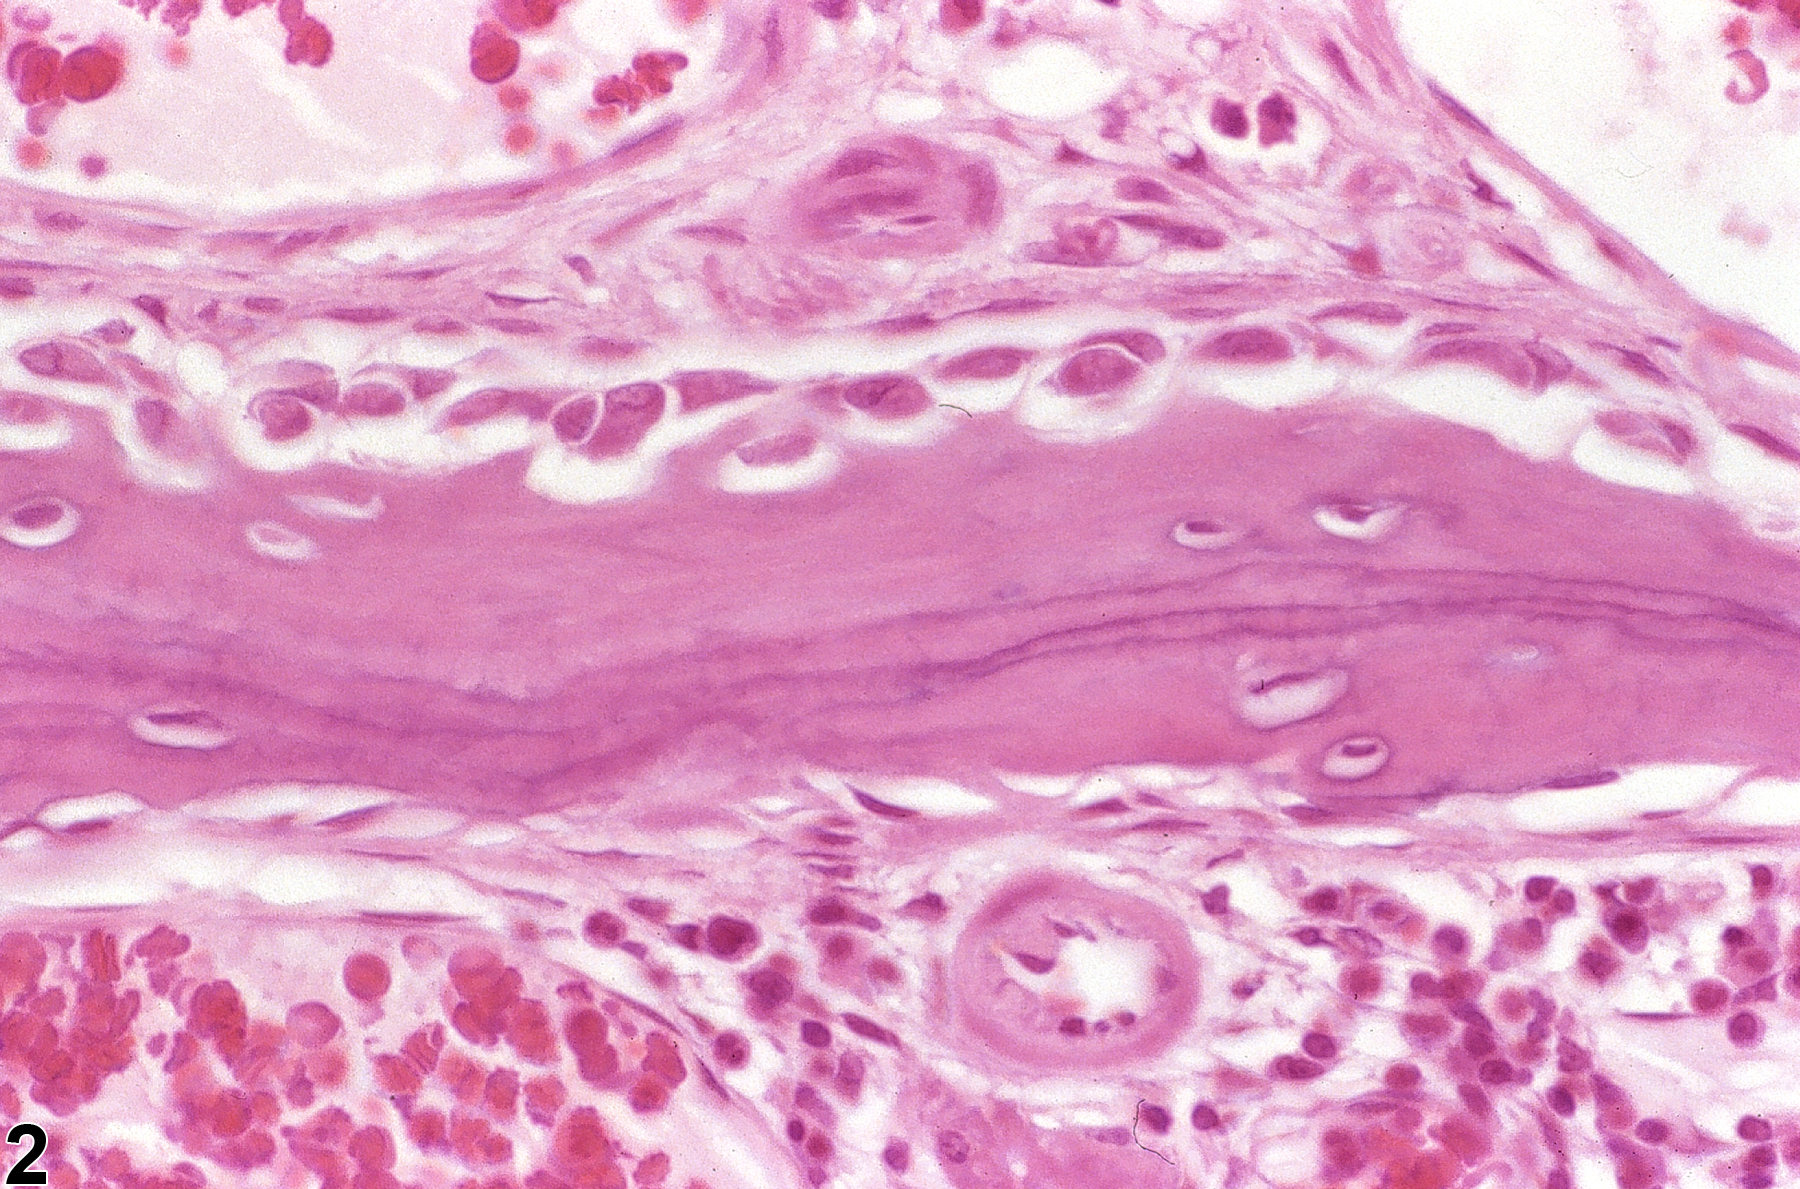 Image of periosteal proliferation in the nose, bone from a male F344/N rat in a chronic study